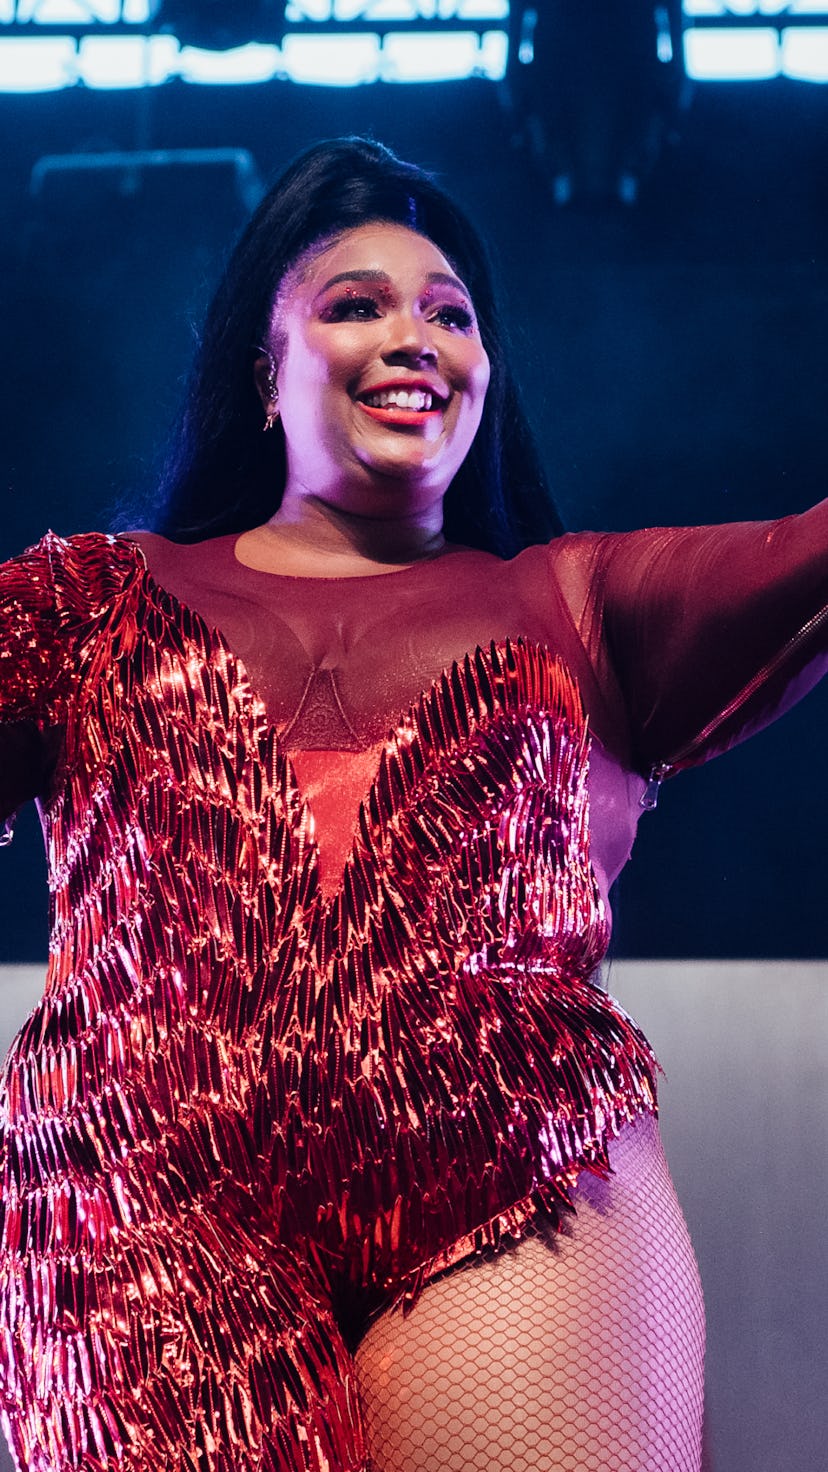 INDIO, CALIFORNIA - APRIL 21: Lizzo performs onstage at the 2019 Coachella Valley Music and Arts Fes...